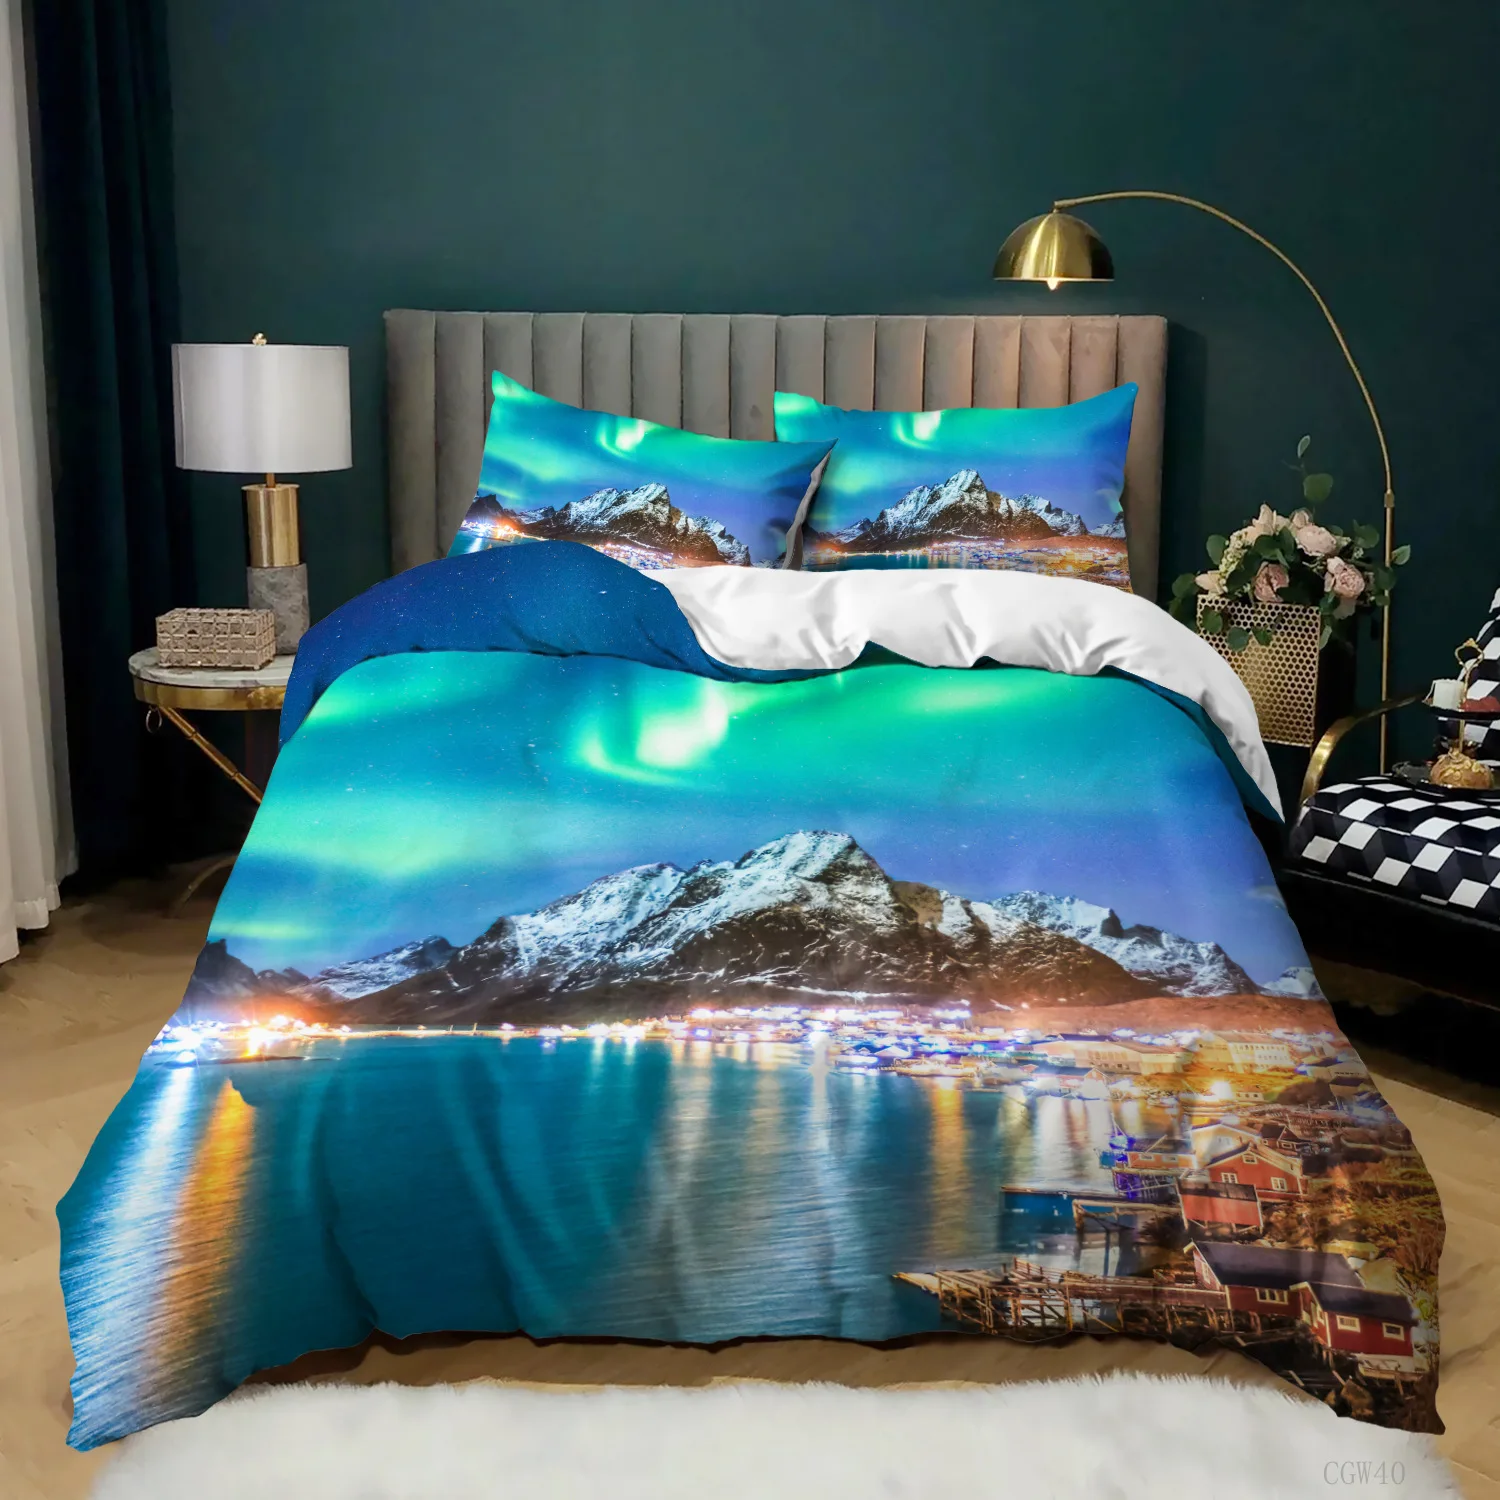 

Aurora Borealis Duvet Cover King Queen Pale Weather Over The Hills with Waterfall Creek Nature Landscape Polyester Bedding Set